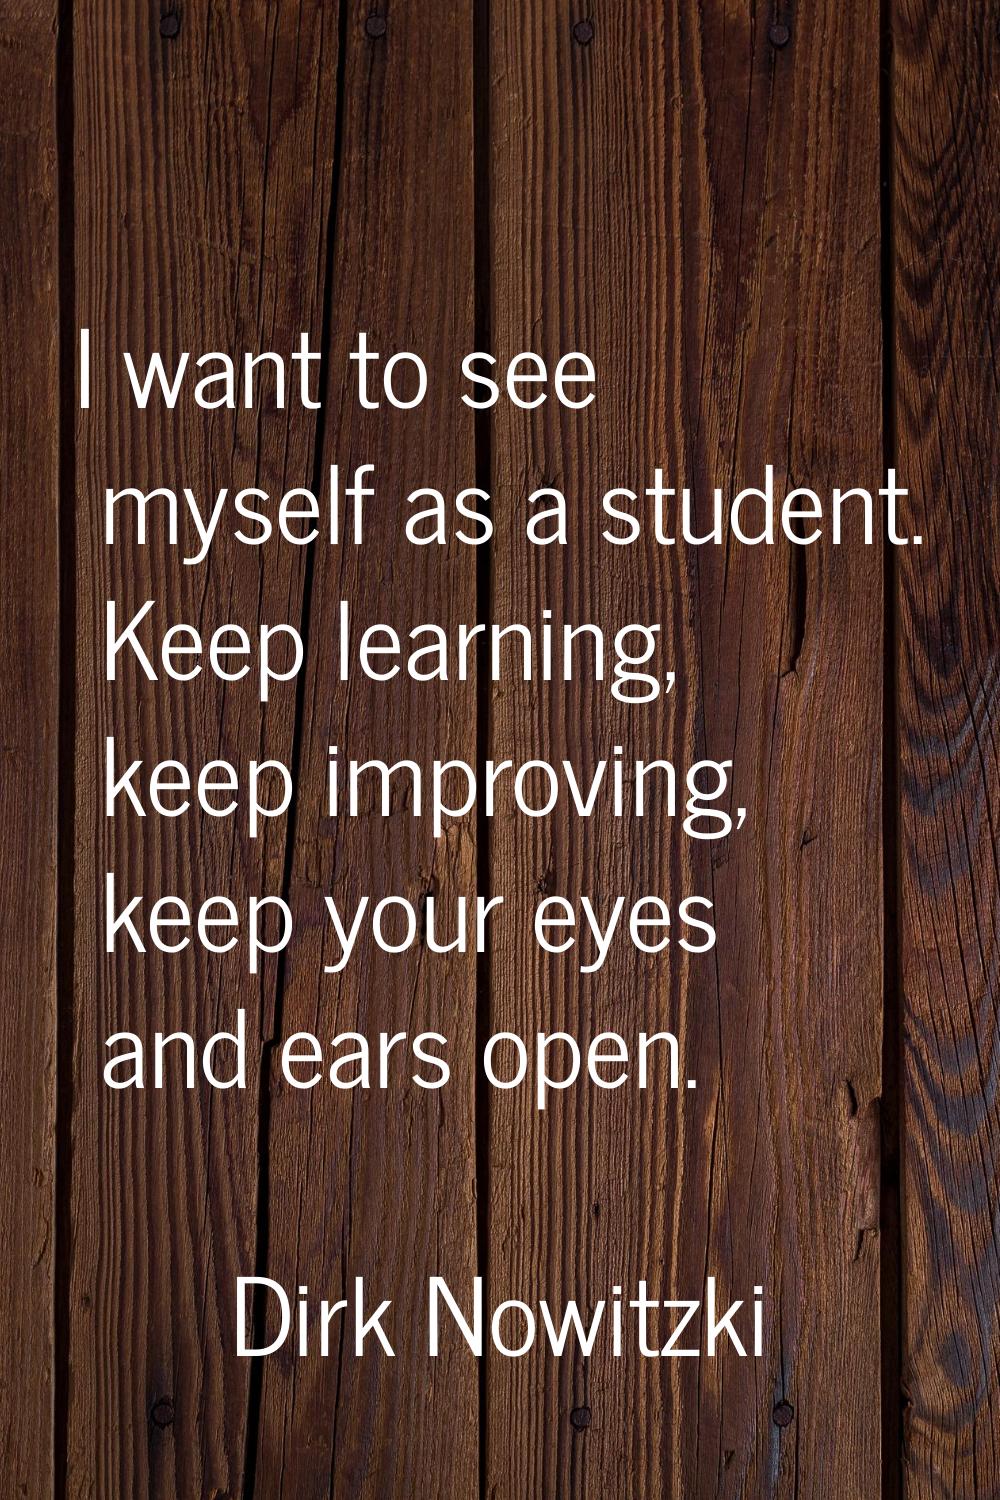 I want to see myself as a student. Keep learning, keep improving, keep your eyes and ears open.